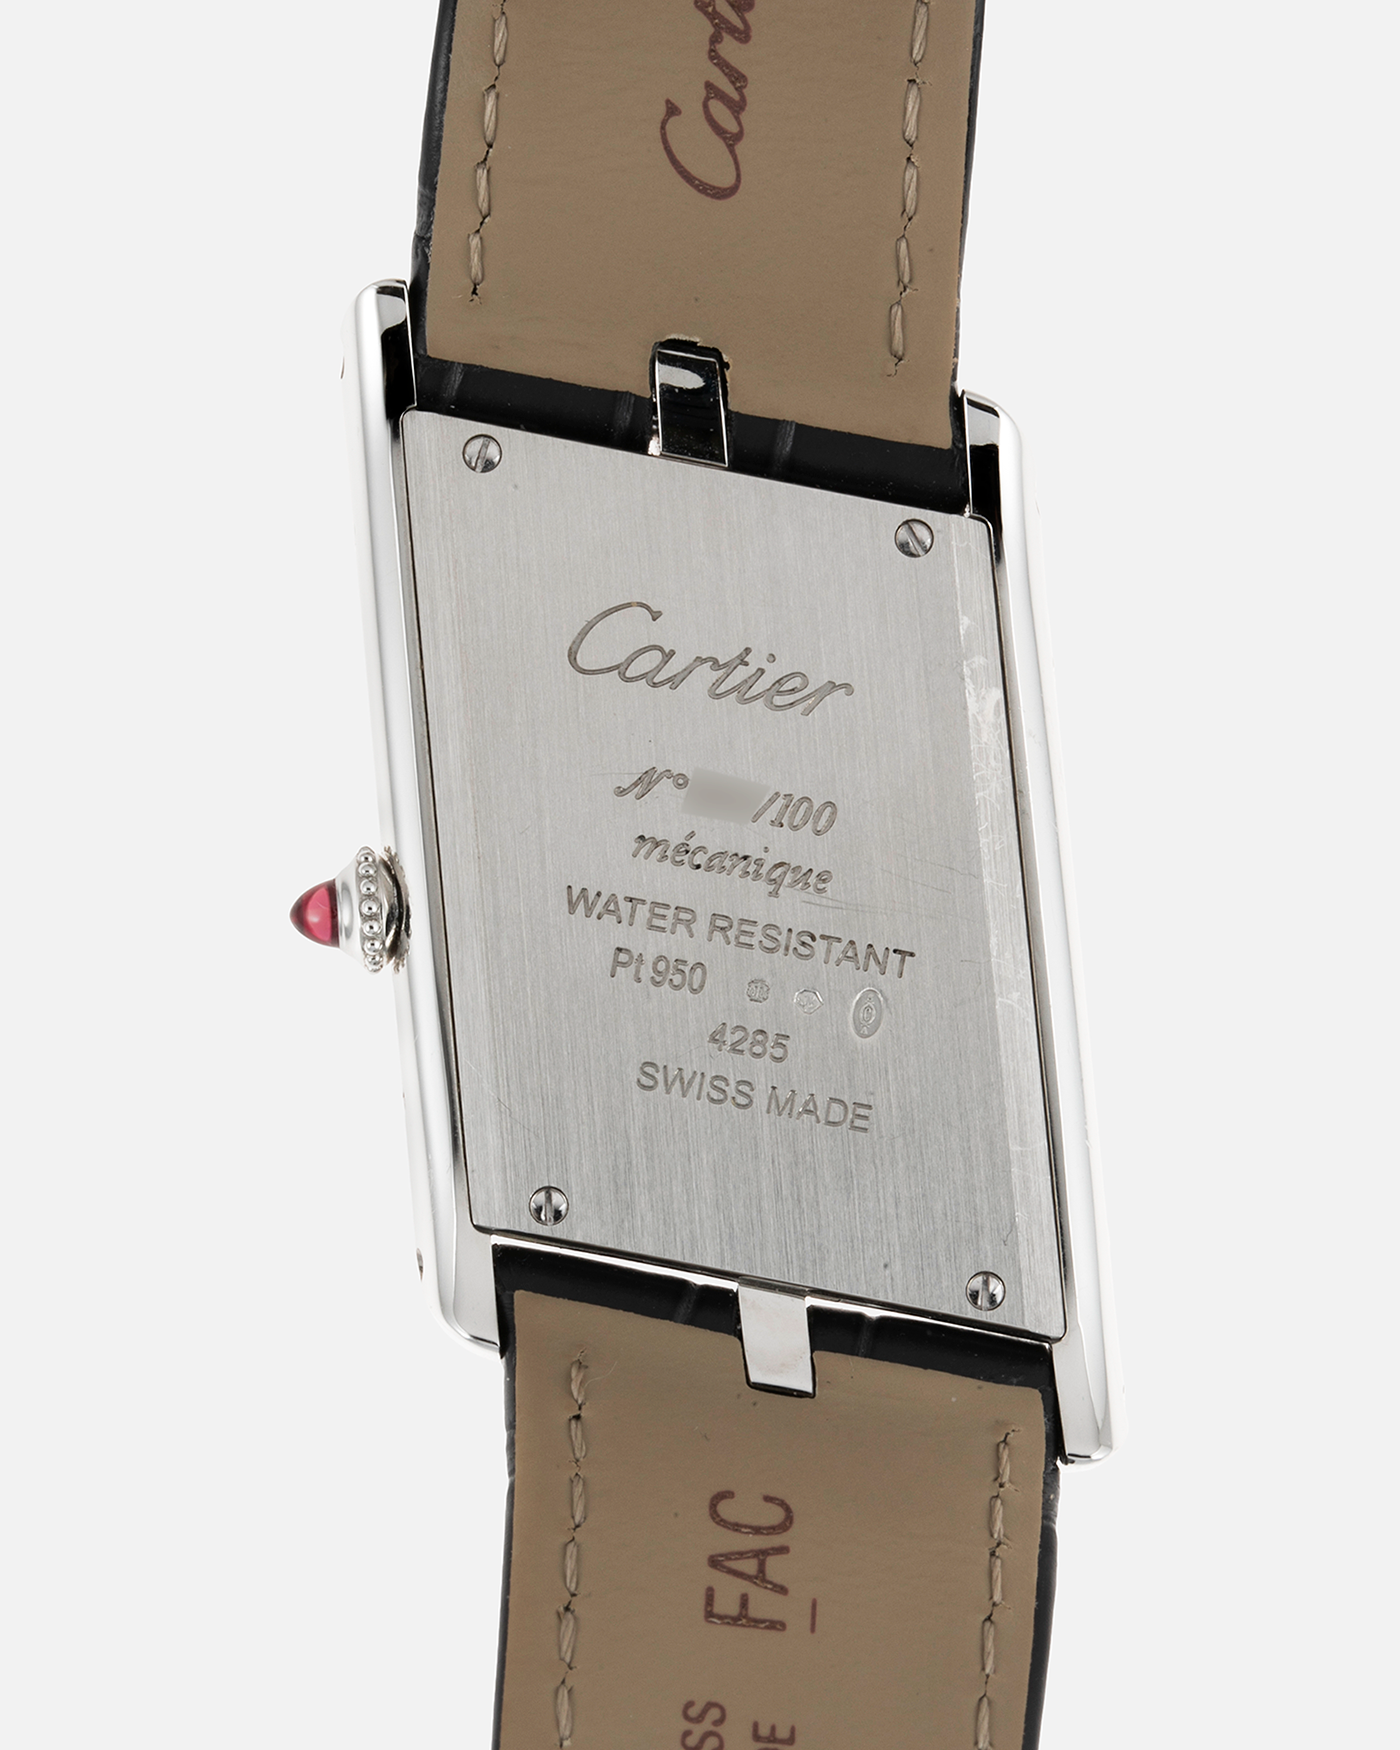 Brand: Cartier Year: 2020 Model: Privé Tank Asymétrique Platinum Reference: WGTA0042 Material: Platinum Movement: Cal. 1917MC, Manual-Winding Case Diameter: 47.15mm x 26.2mm x 6.38mm Strap: Cartier Grey Alligator Leather with Signed Tang Buckle  